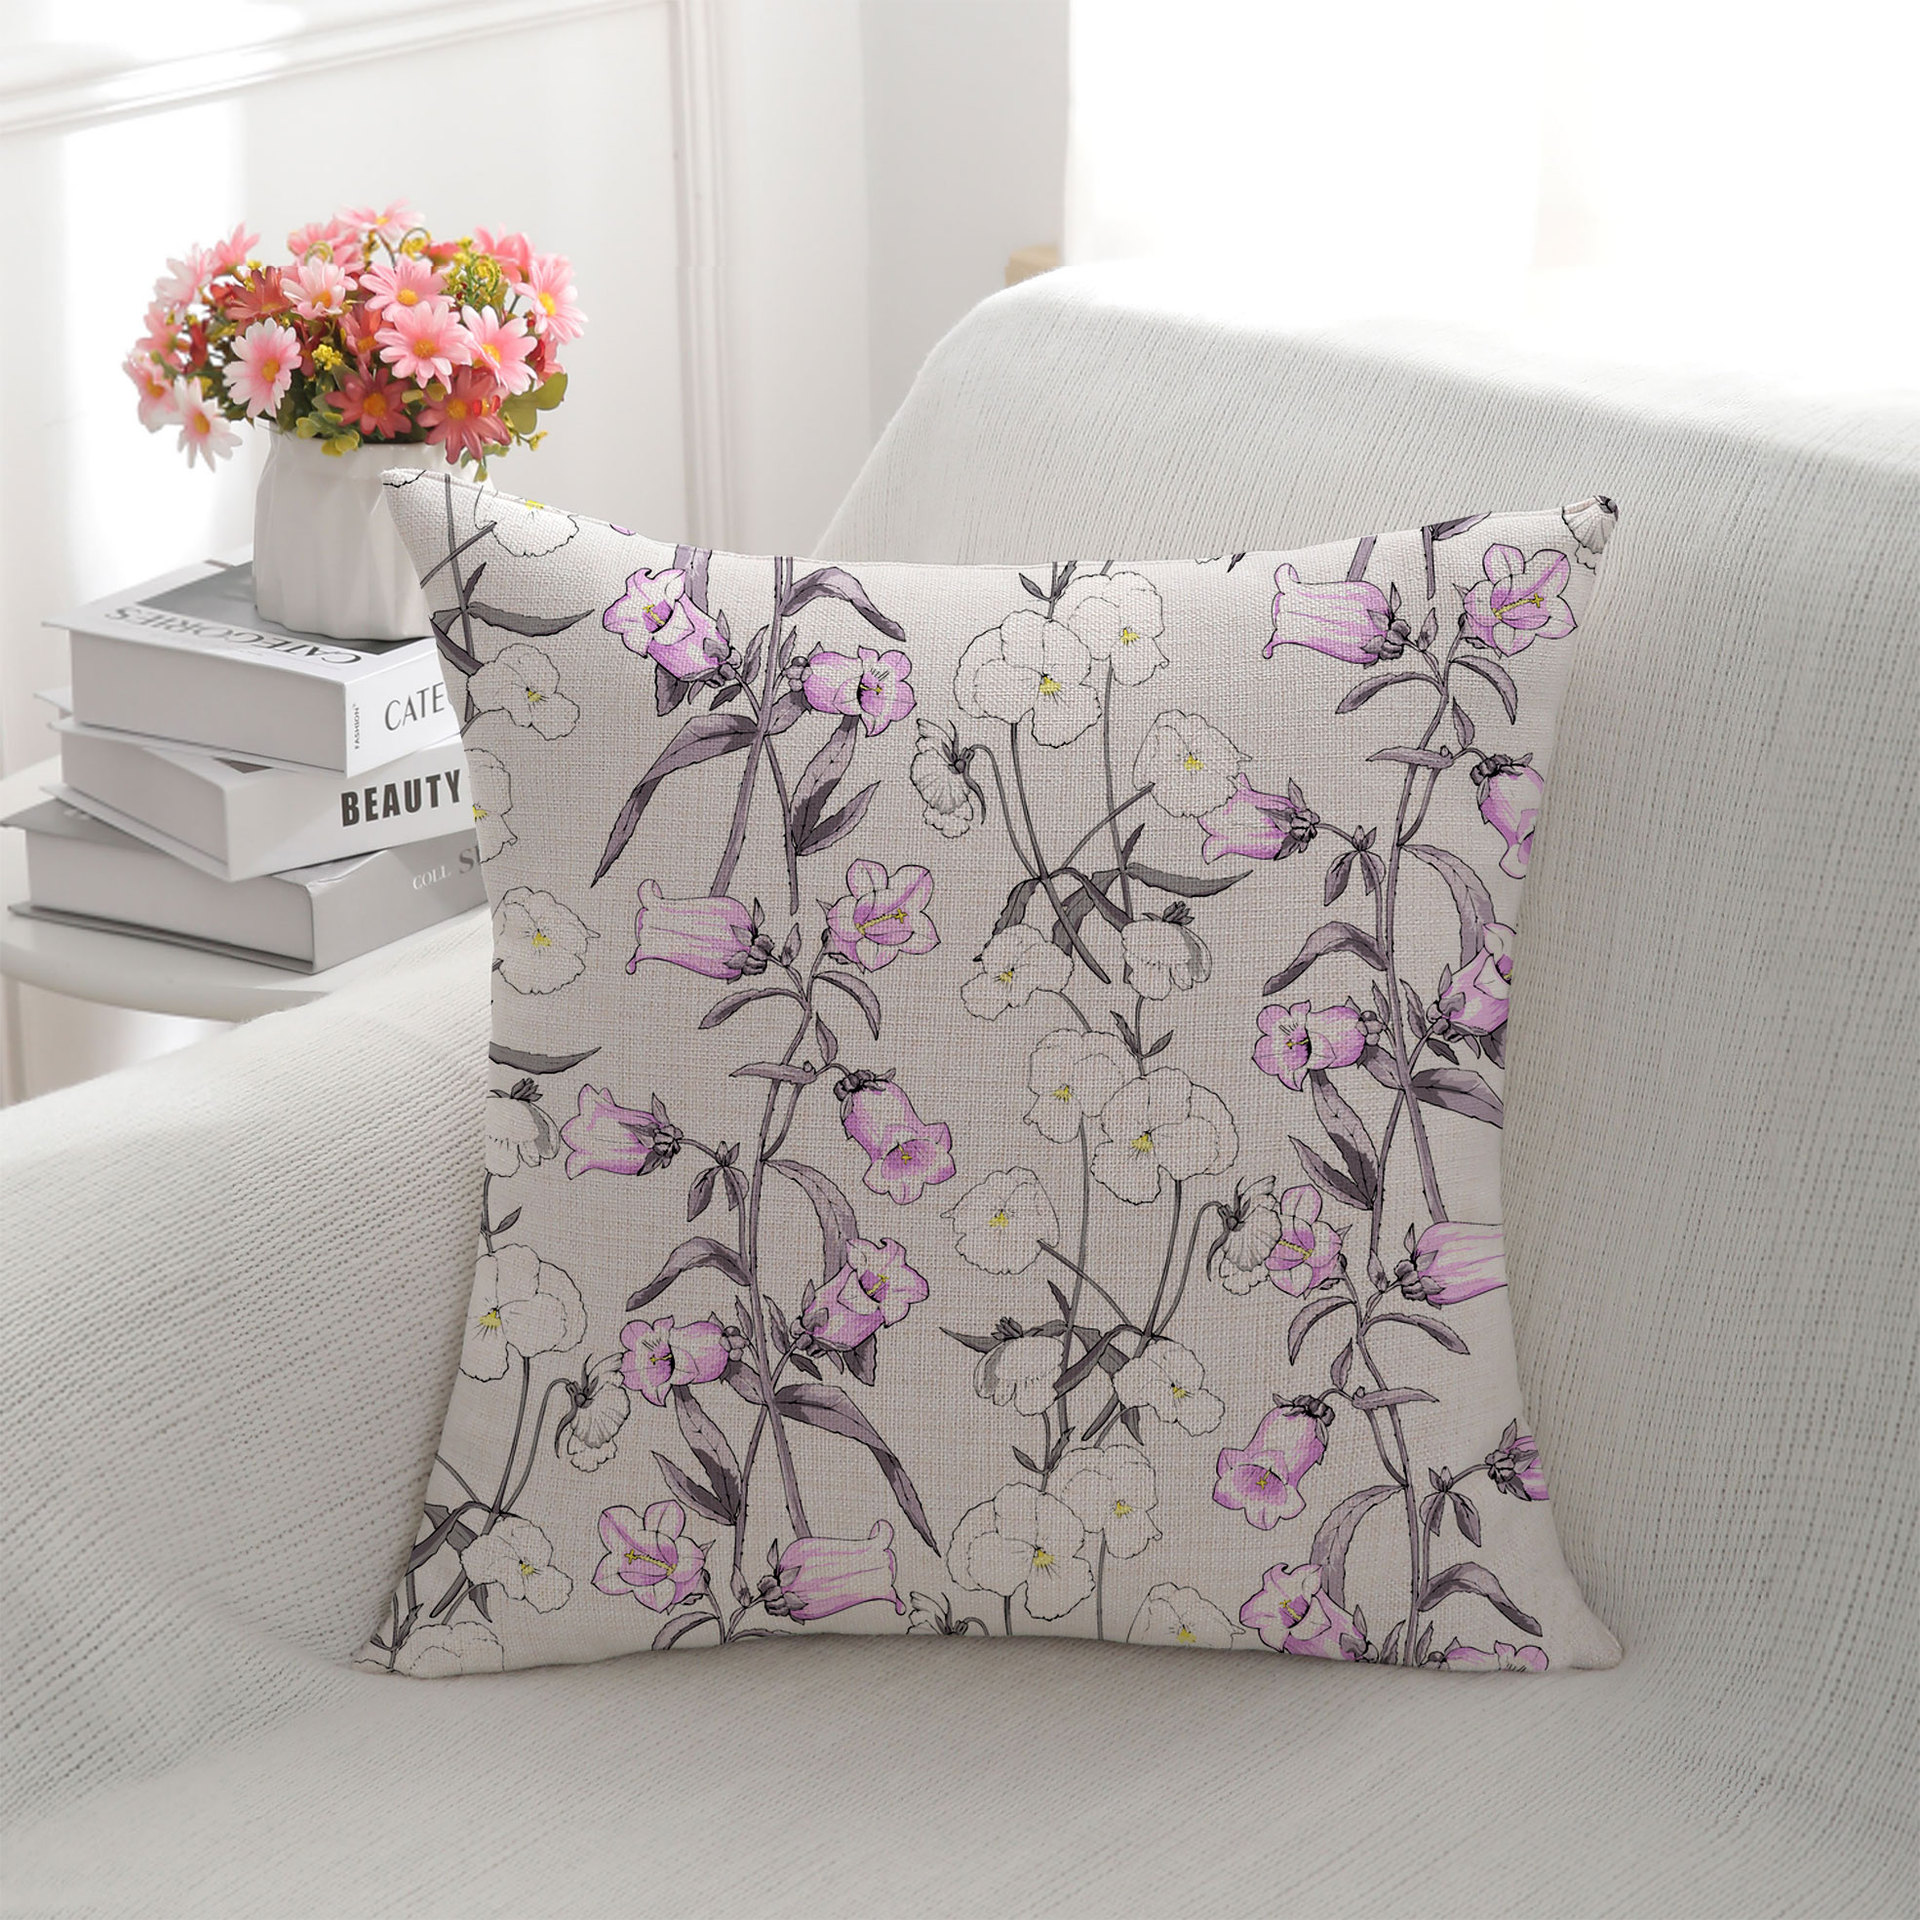 In Stock Wholesale Idyllic Minimalist Digital Printed Pillowcase Small Floral Bed & Breakfast Living Room Bay Window Pillow